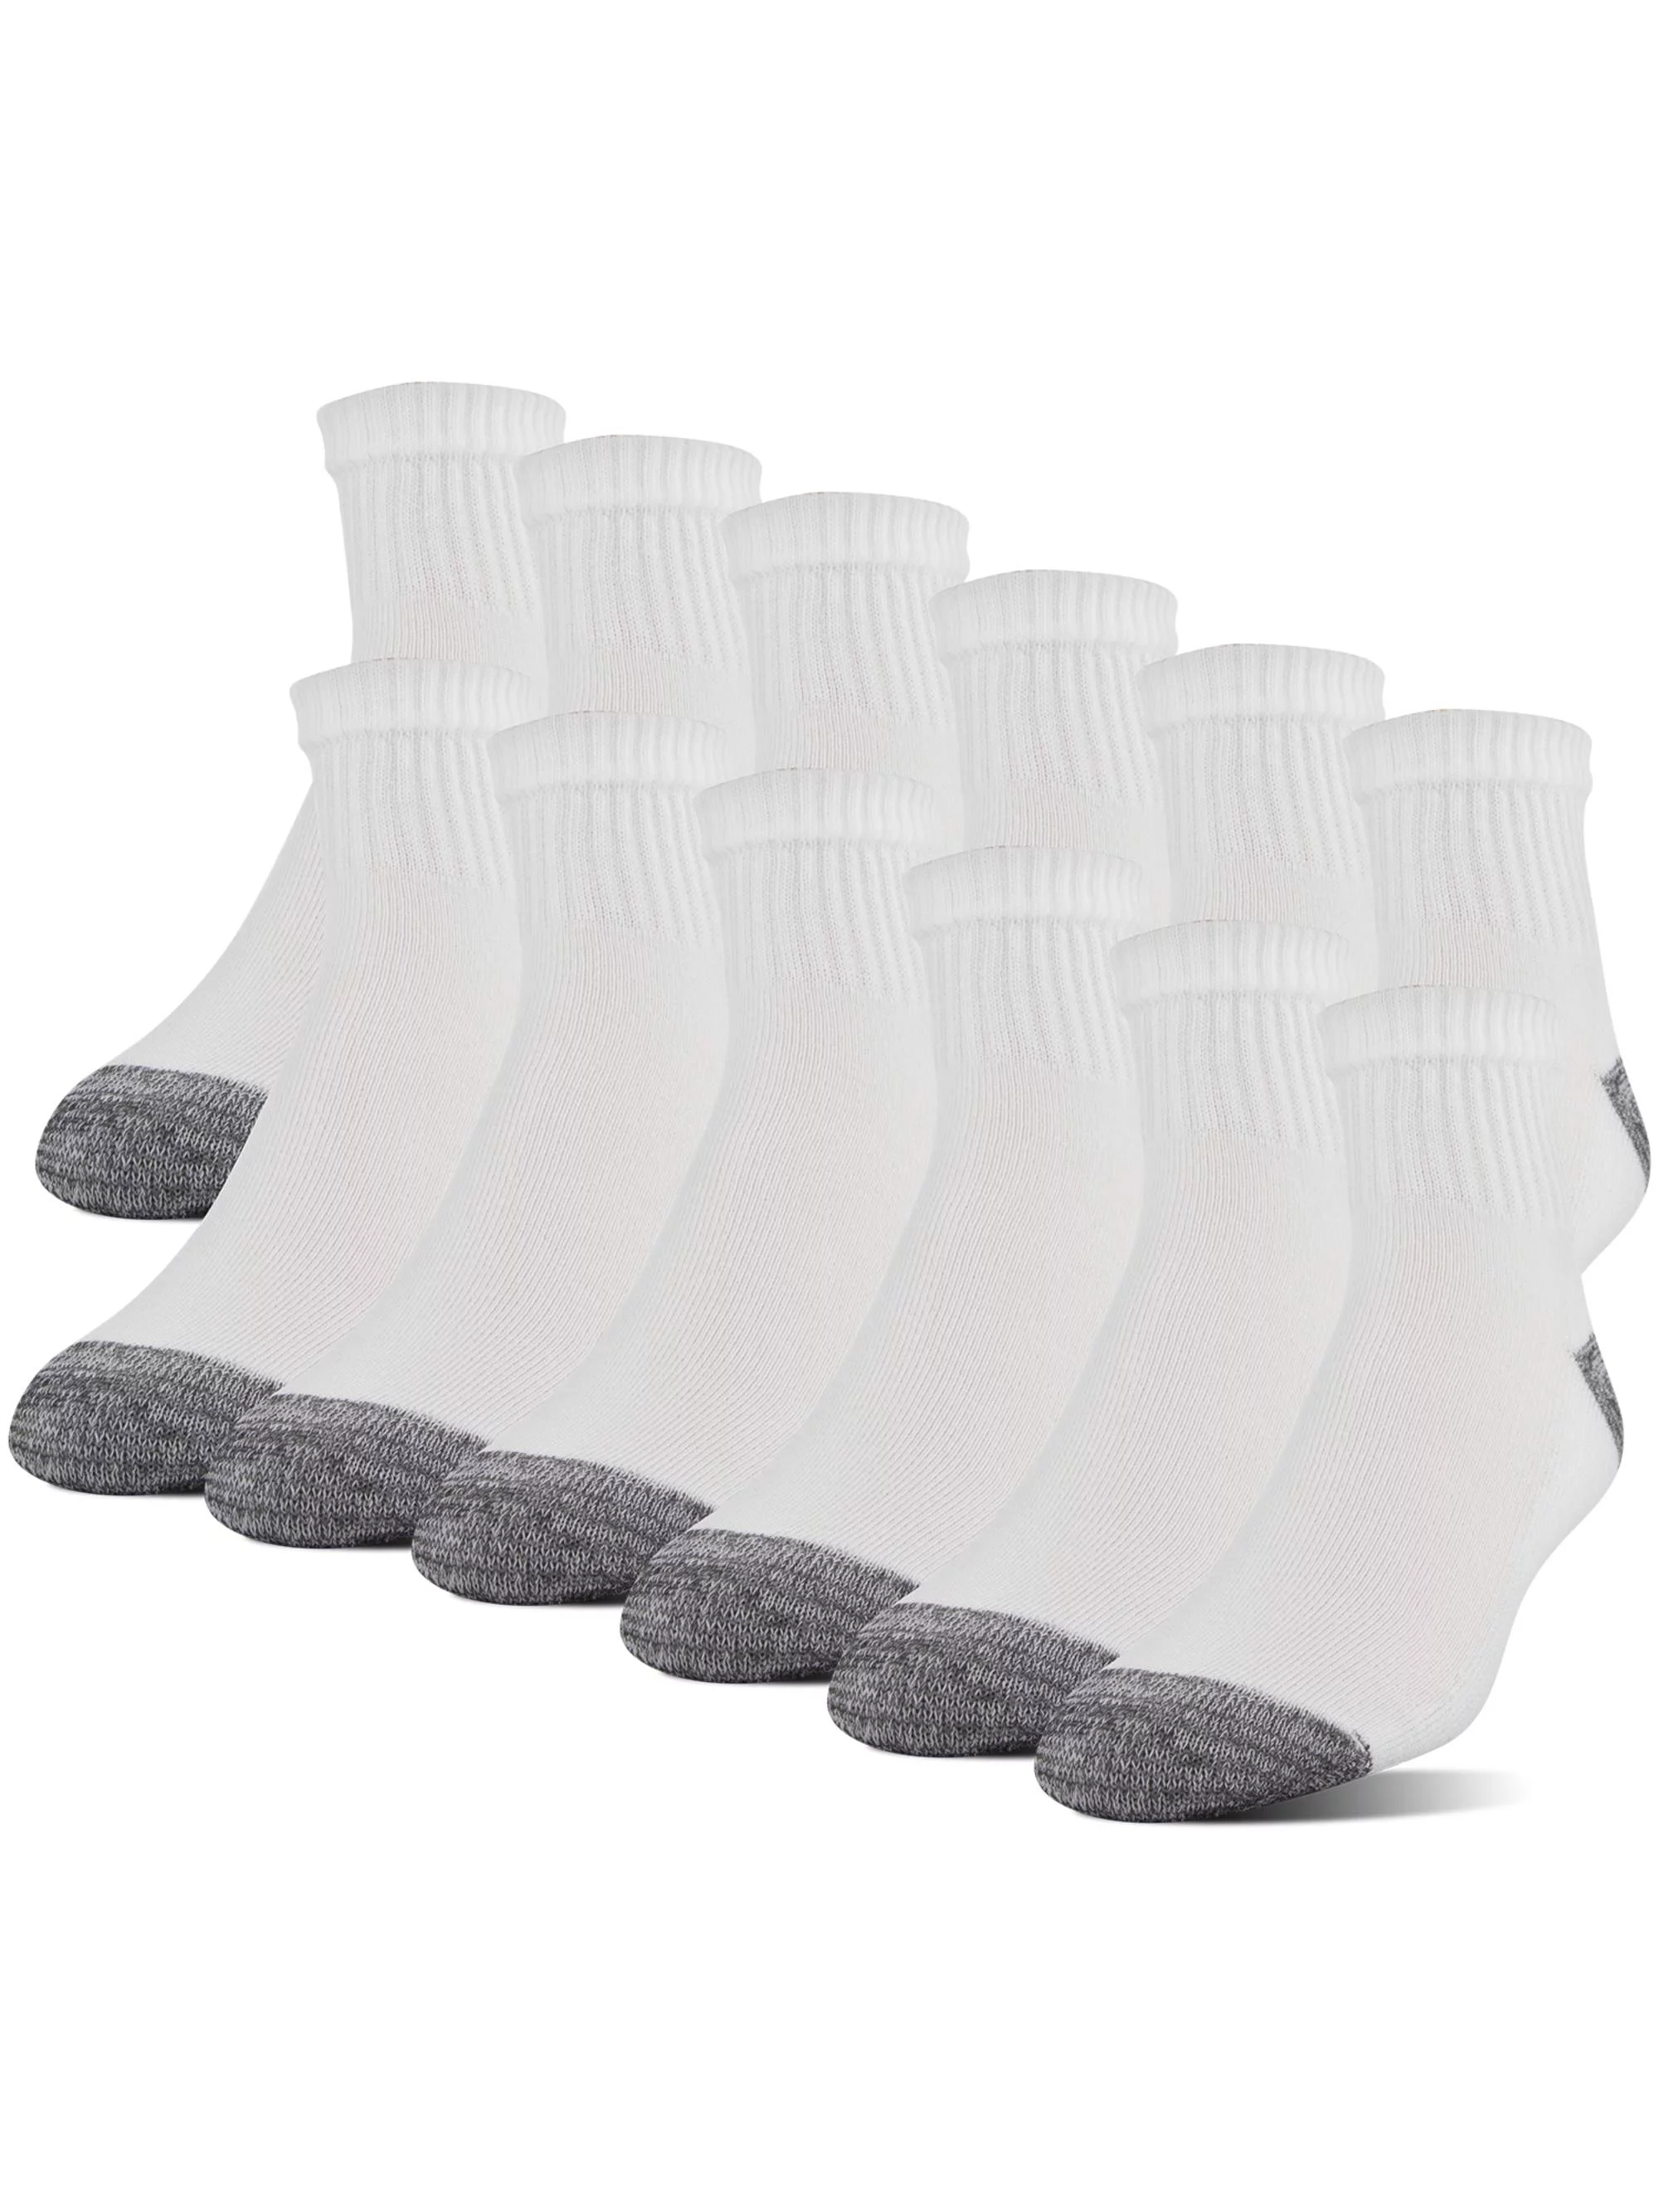 Gildan Adult Men's Half Cushion Terry Foot Bed Ankle Casual Socks, OS One Size, 12-Pack